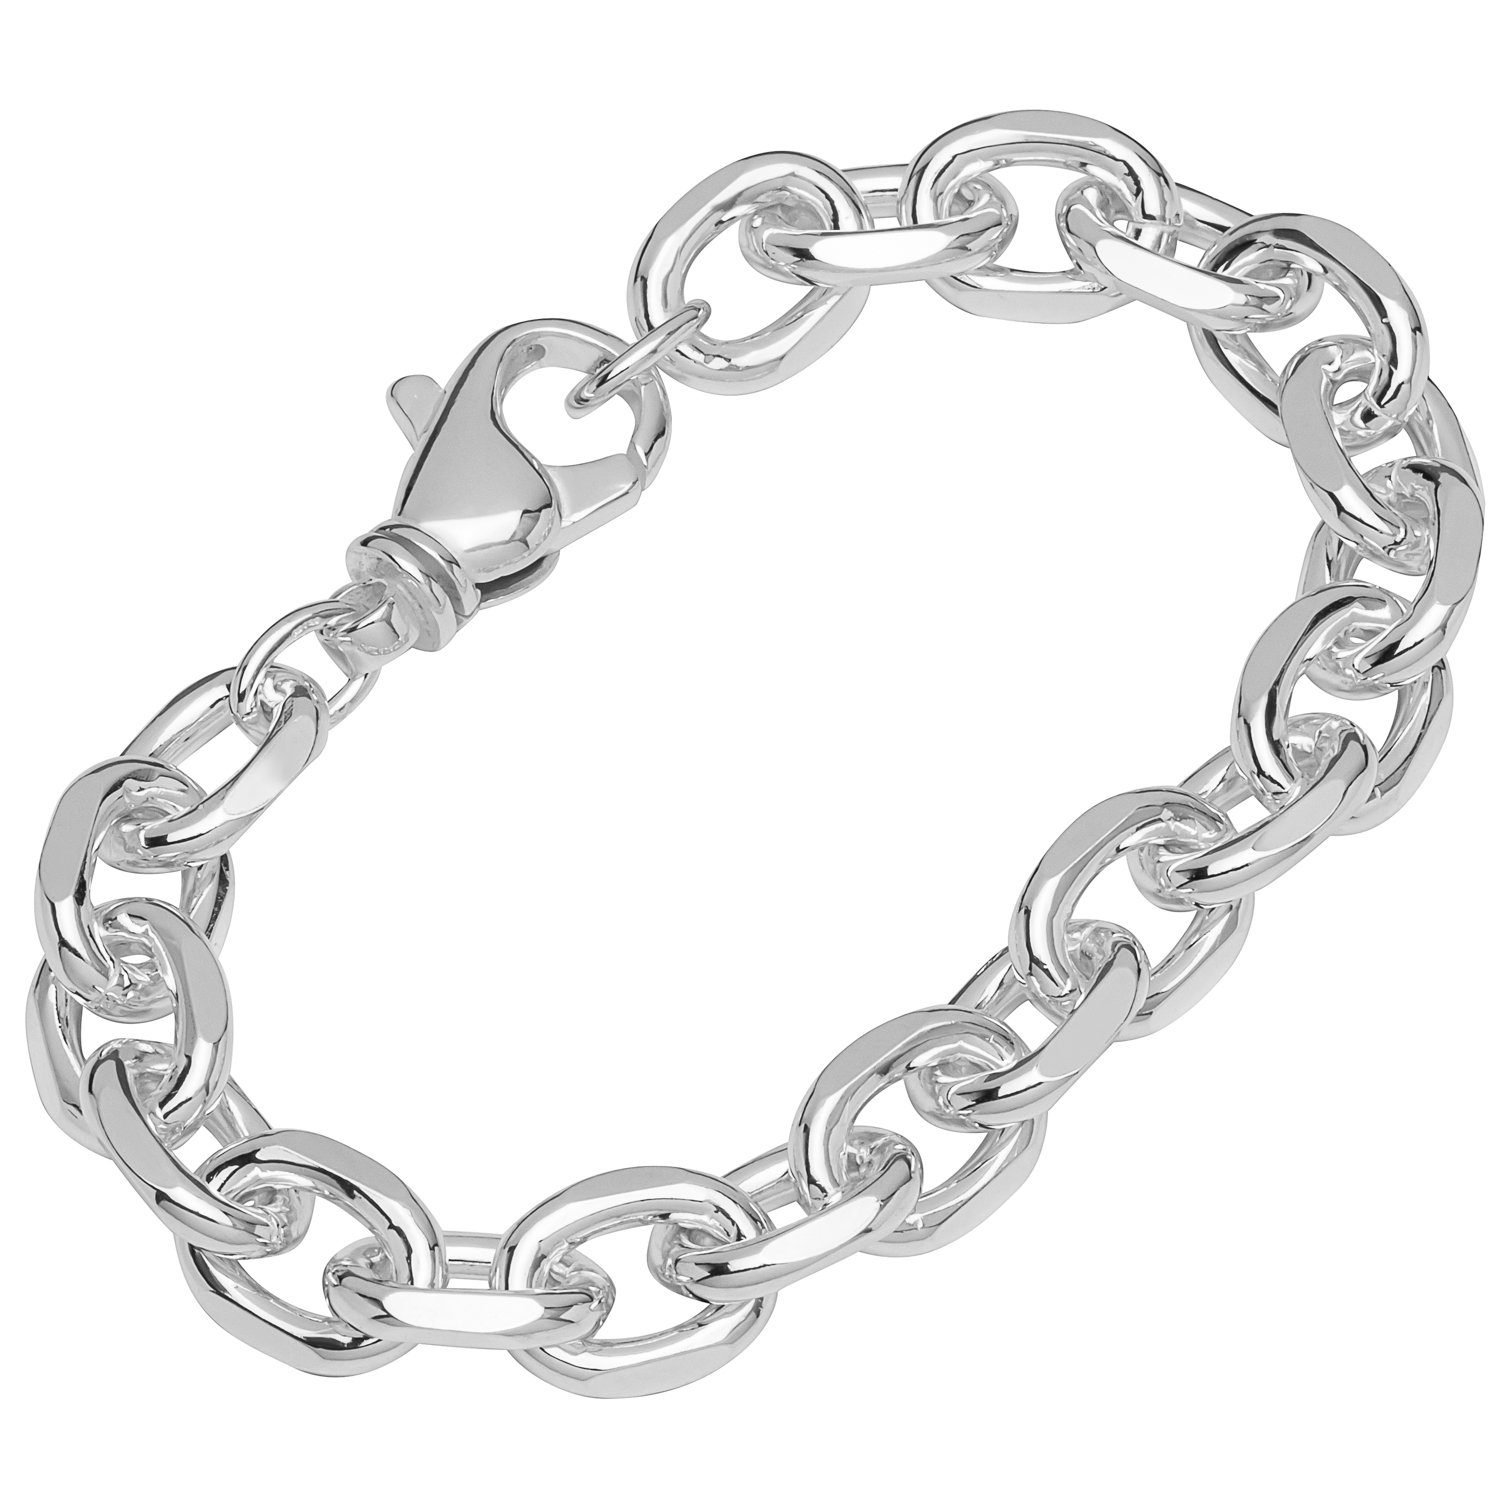 Made Silberarmband 4 925 (1 in Armband 19cm NKlaus Ankerkette fach Sterling Silber Germany Stück),